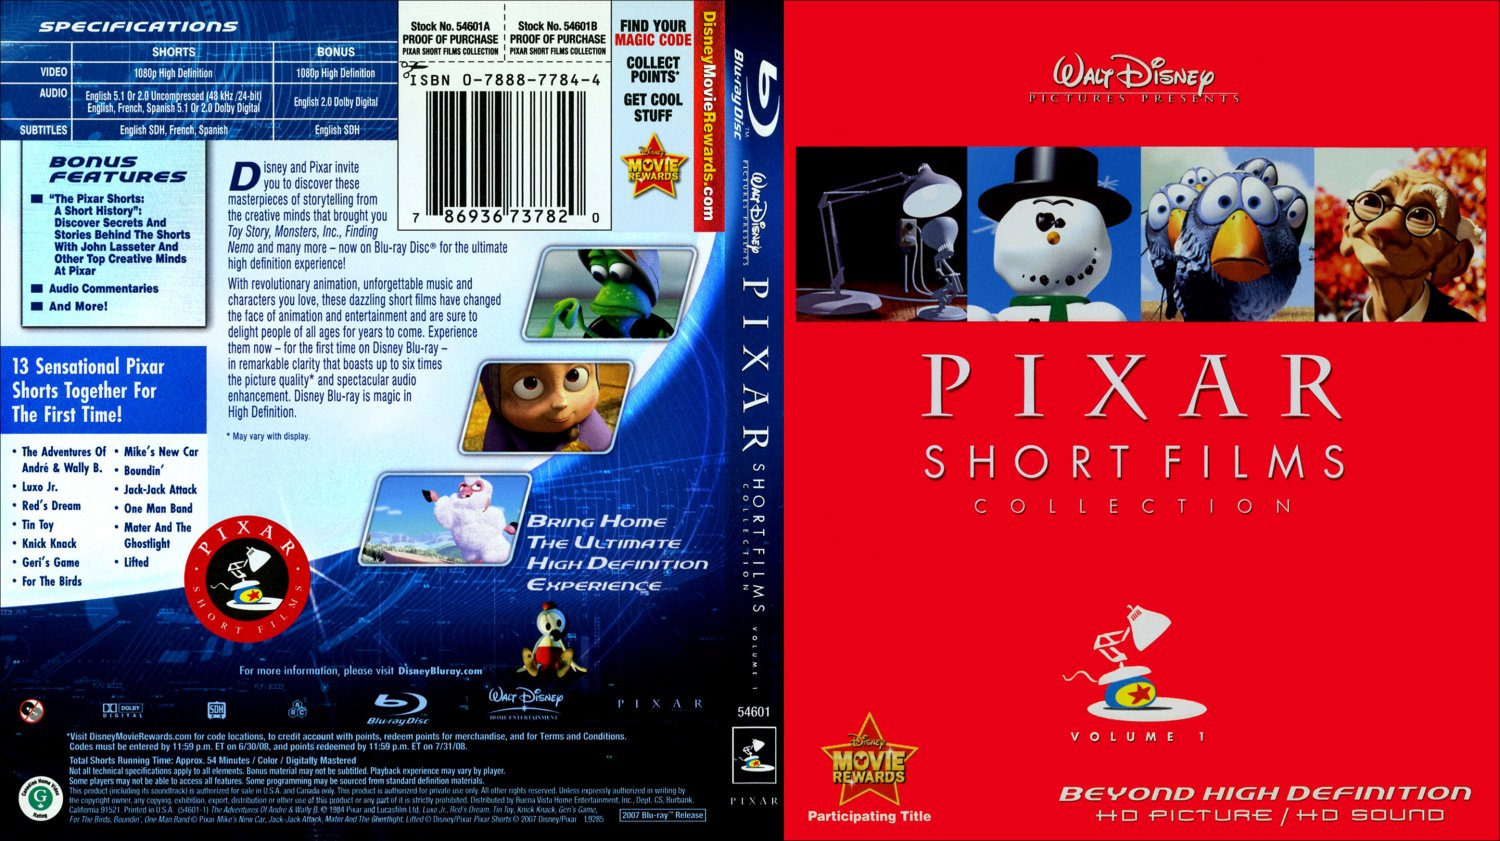 pixar-short-films-collection-vol-volume-and-blu-ray-dvd-my-xxx-hot-girl